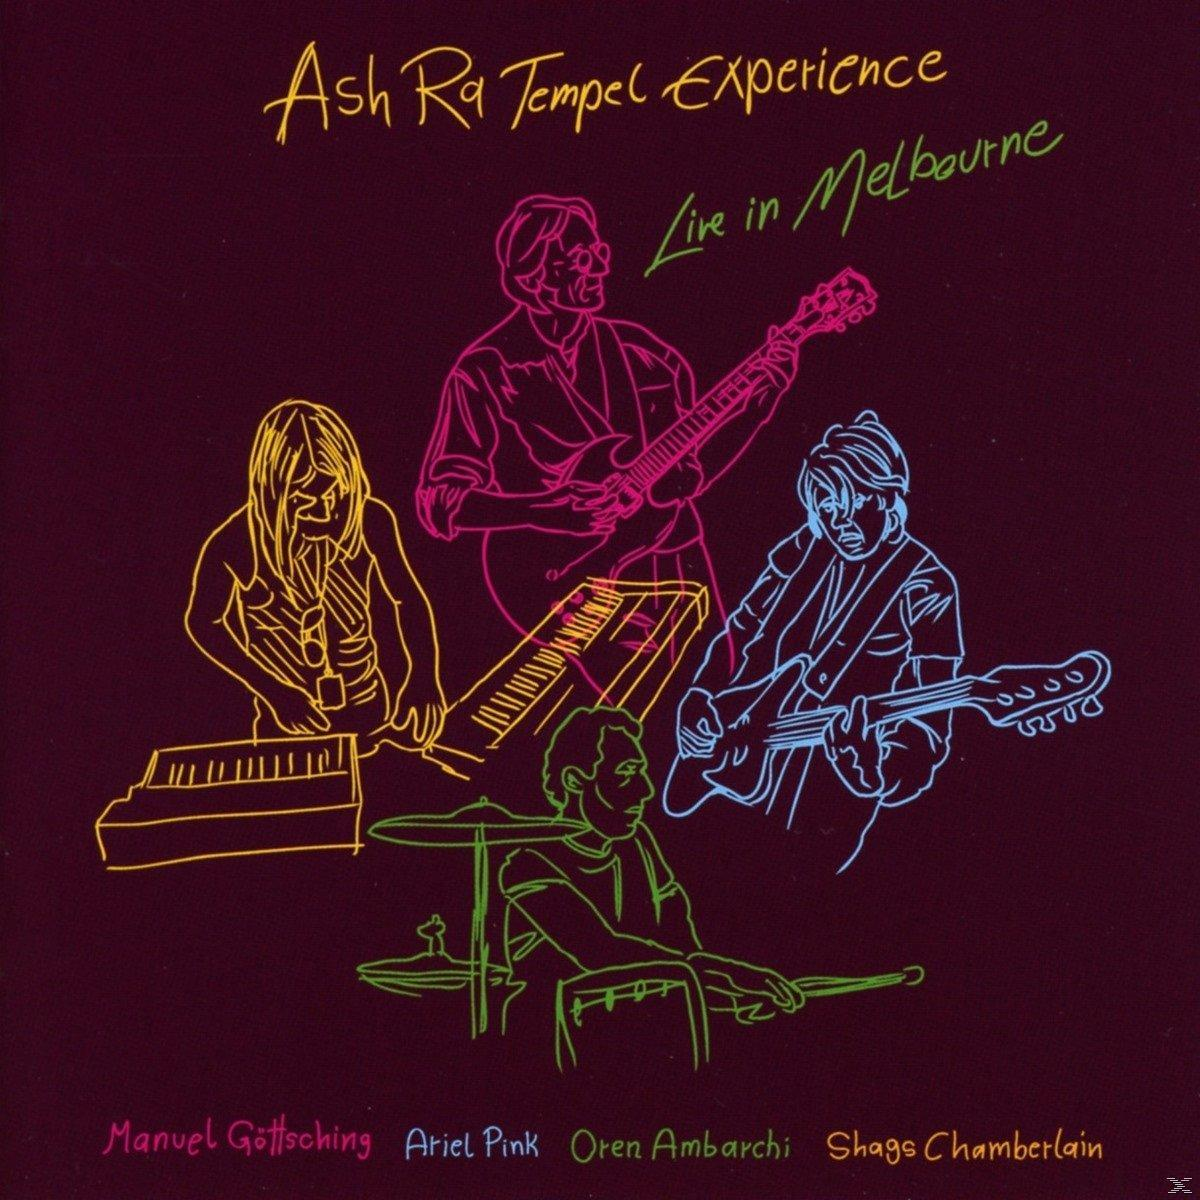 Ra Melbourne - Tempel Experience In - (CD) Ash Live